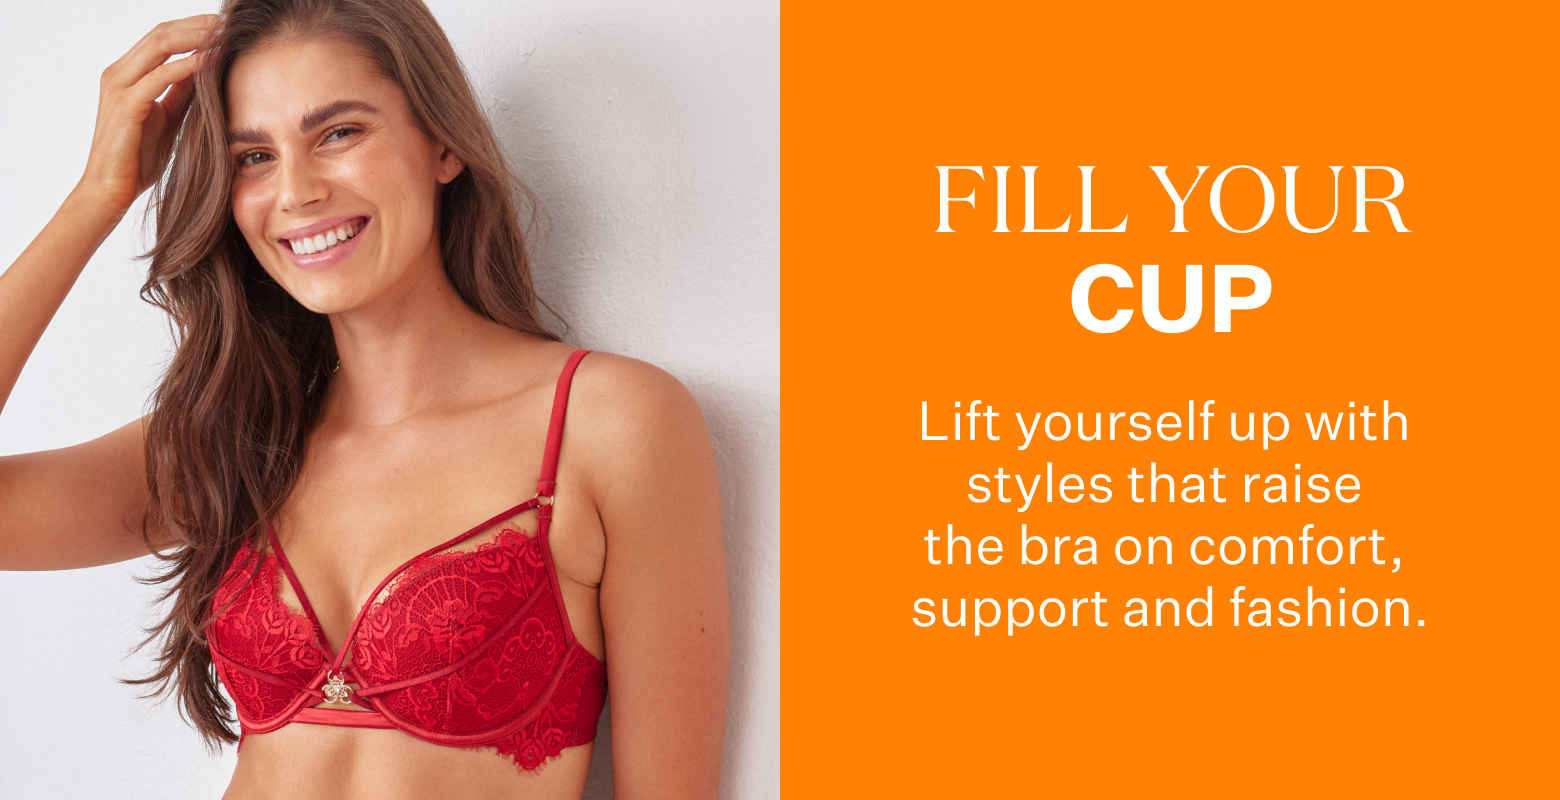 Fill Your Cup. Lift yourself up with styles that raise the bra on comfort, support and fashion.